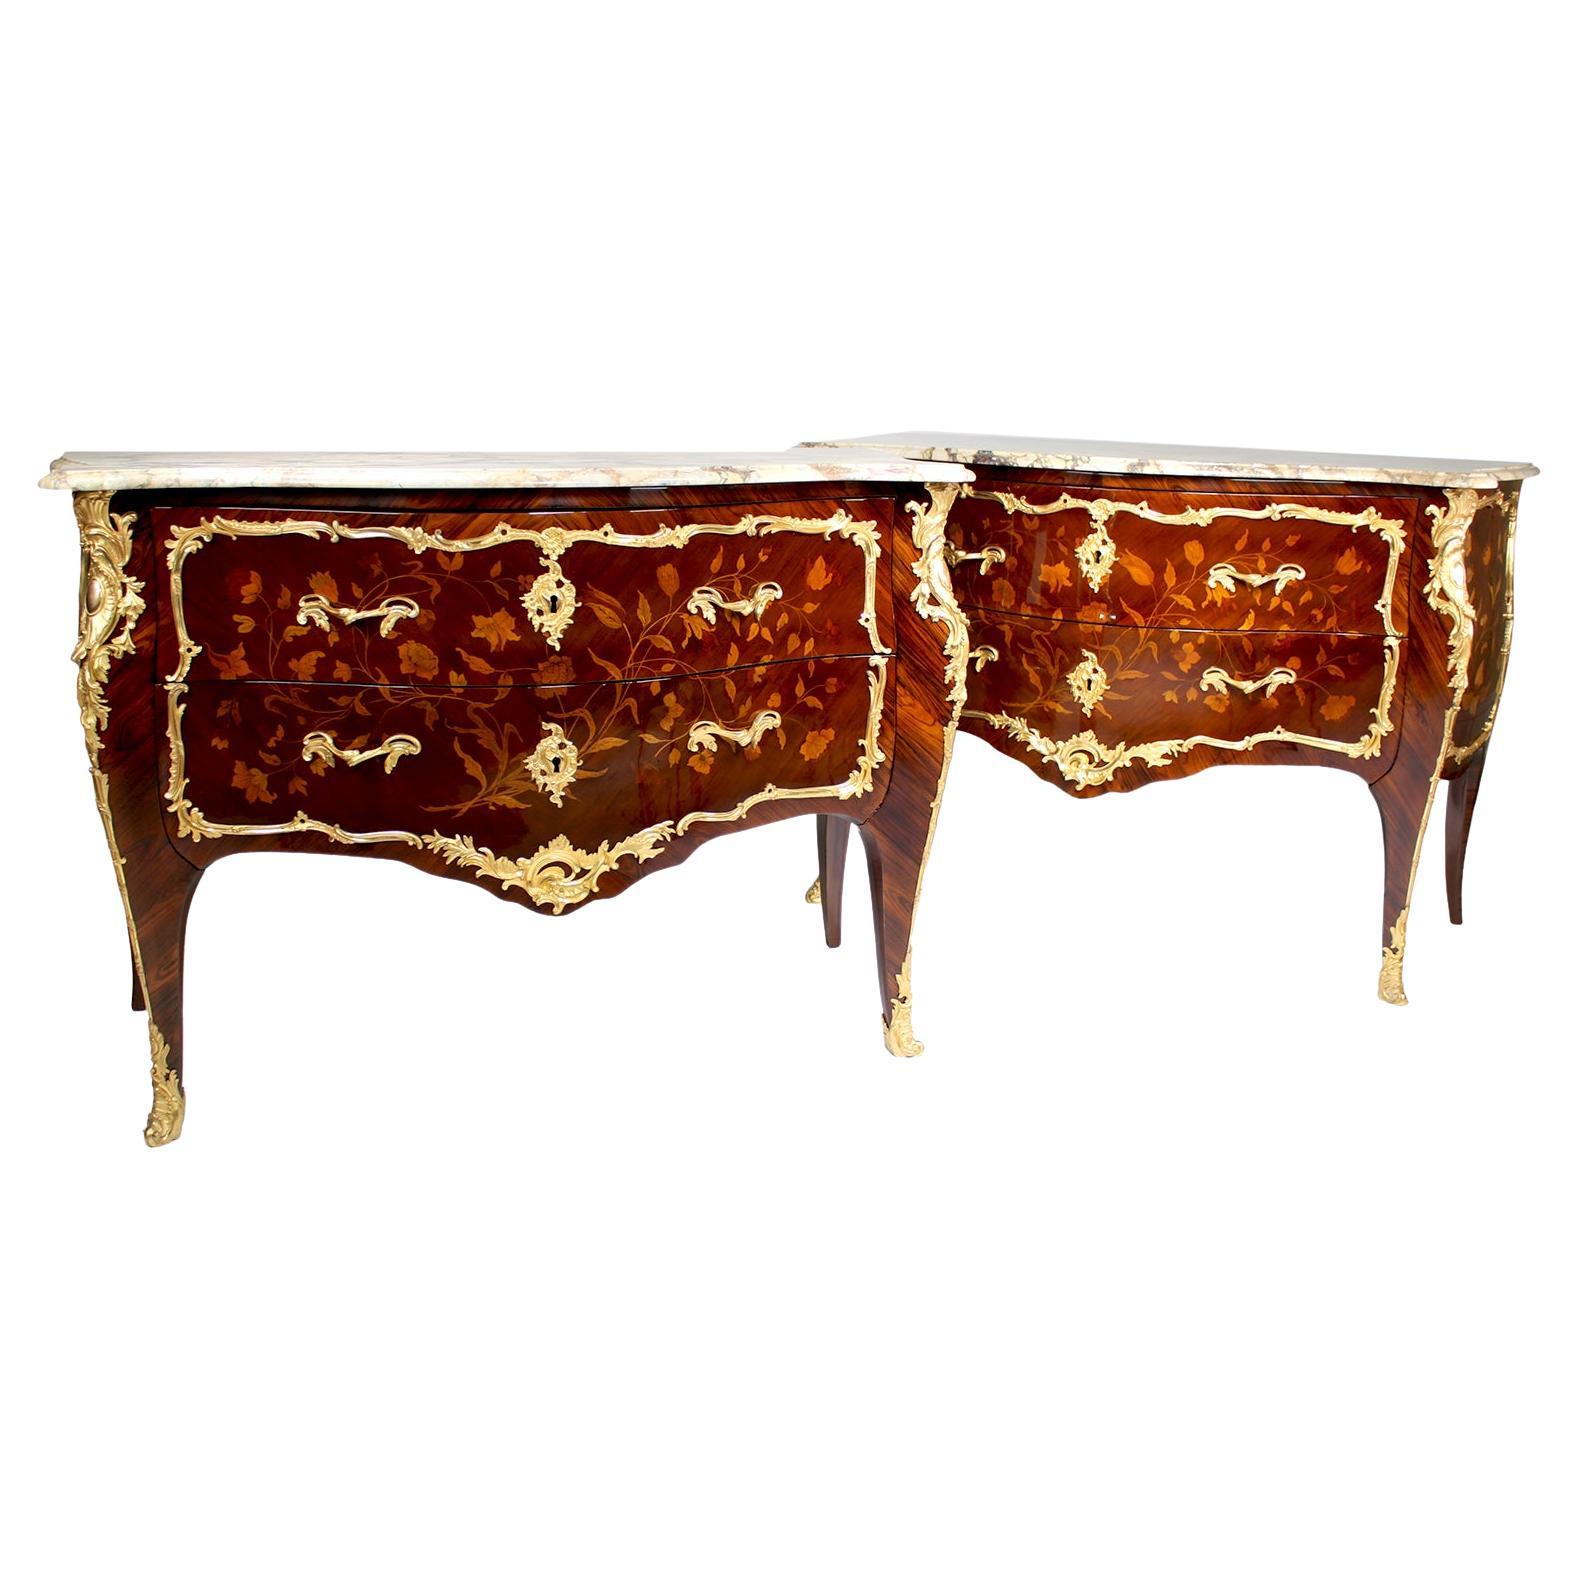 Fine Pair French 19th Century Louis XV Style Gilt-Bronze & Marquetry Commodes